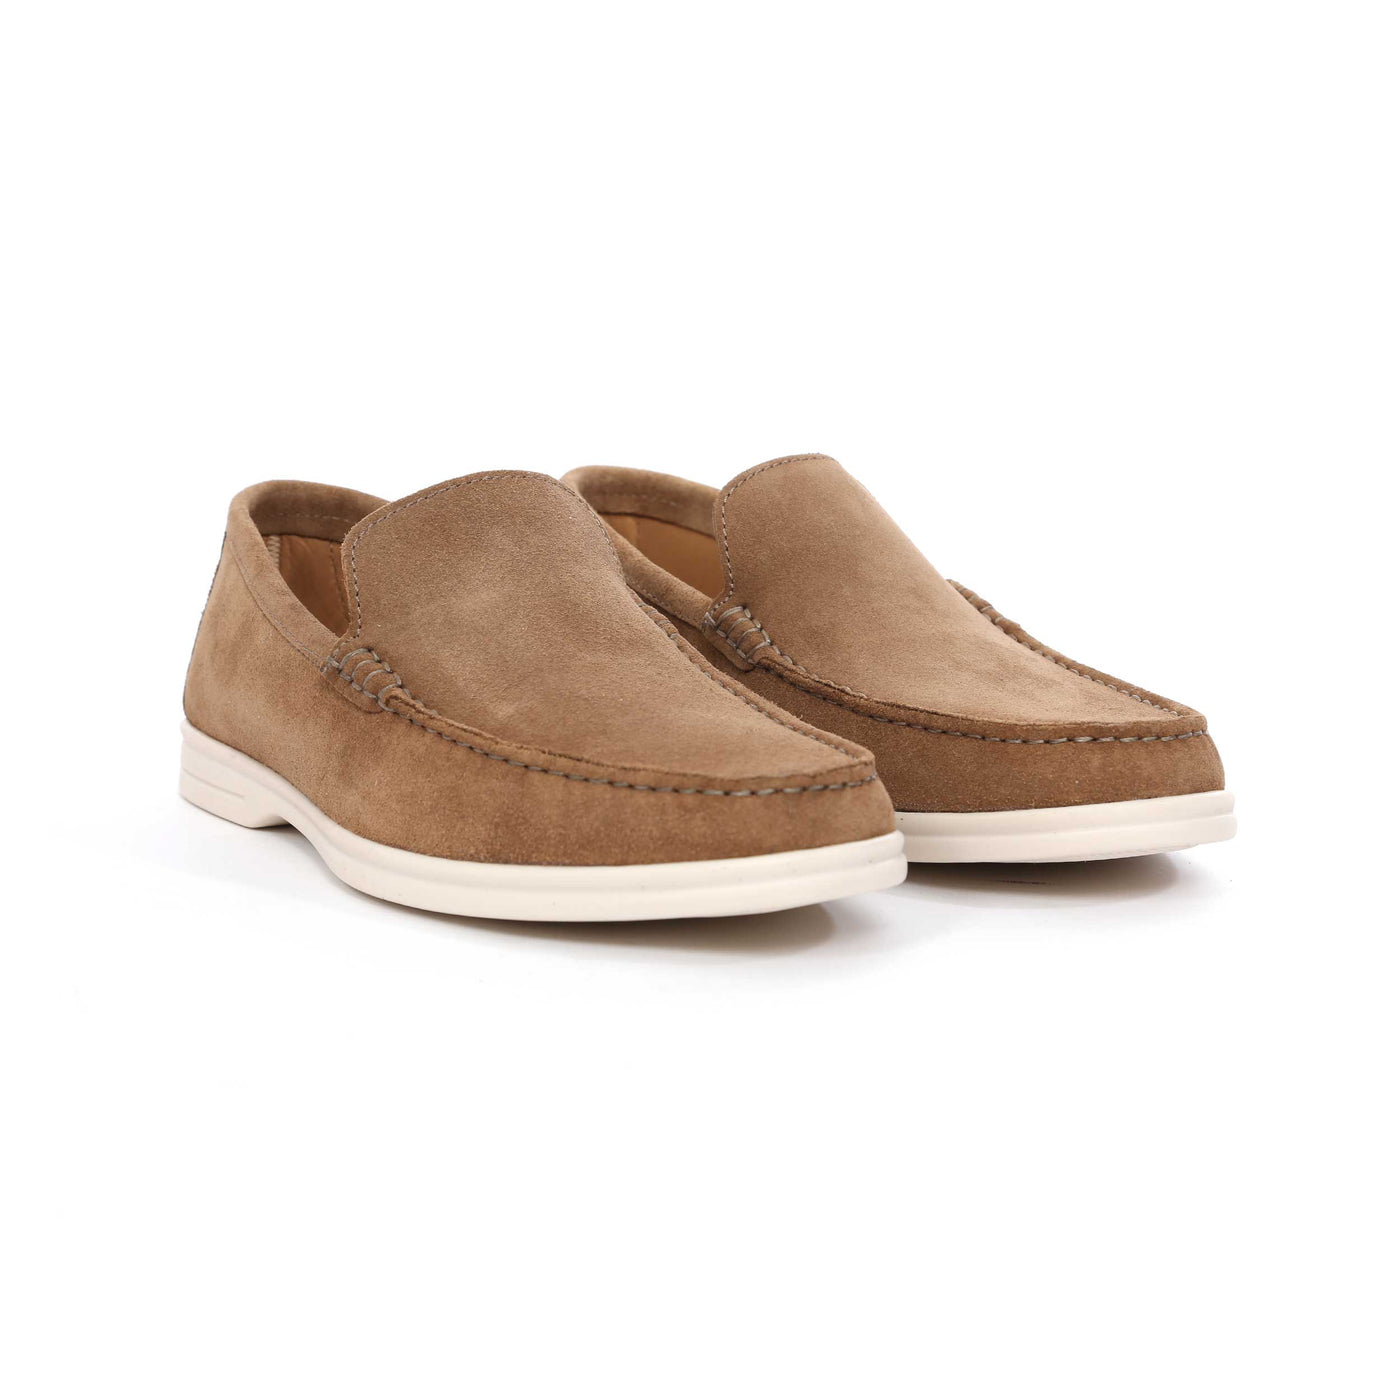 Oliver Sweeney Alicante Shoe in Taupe Pair